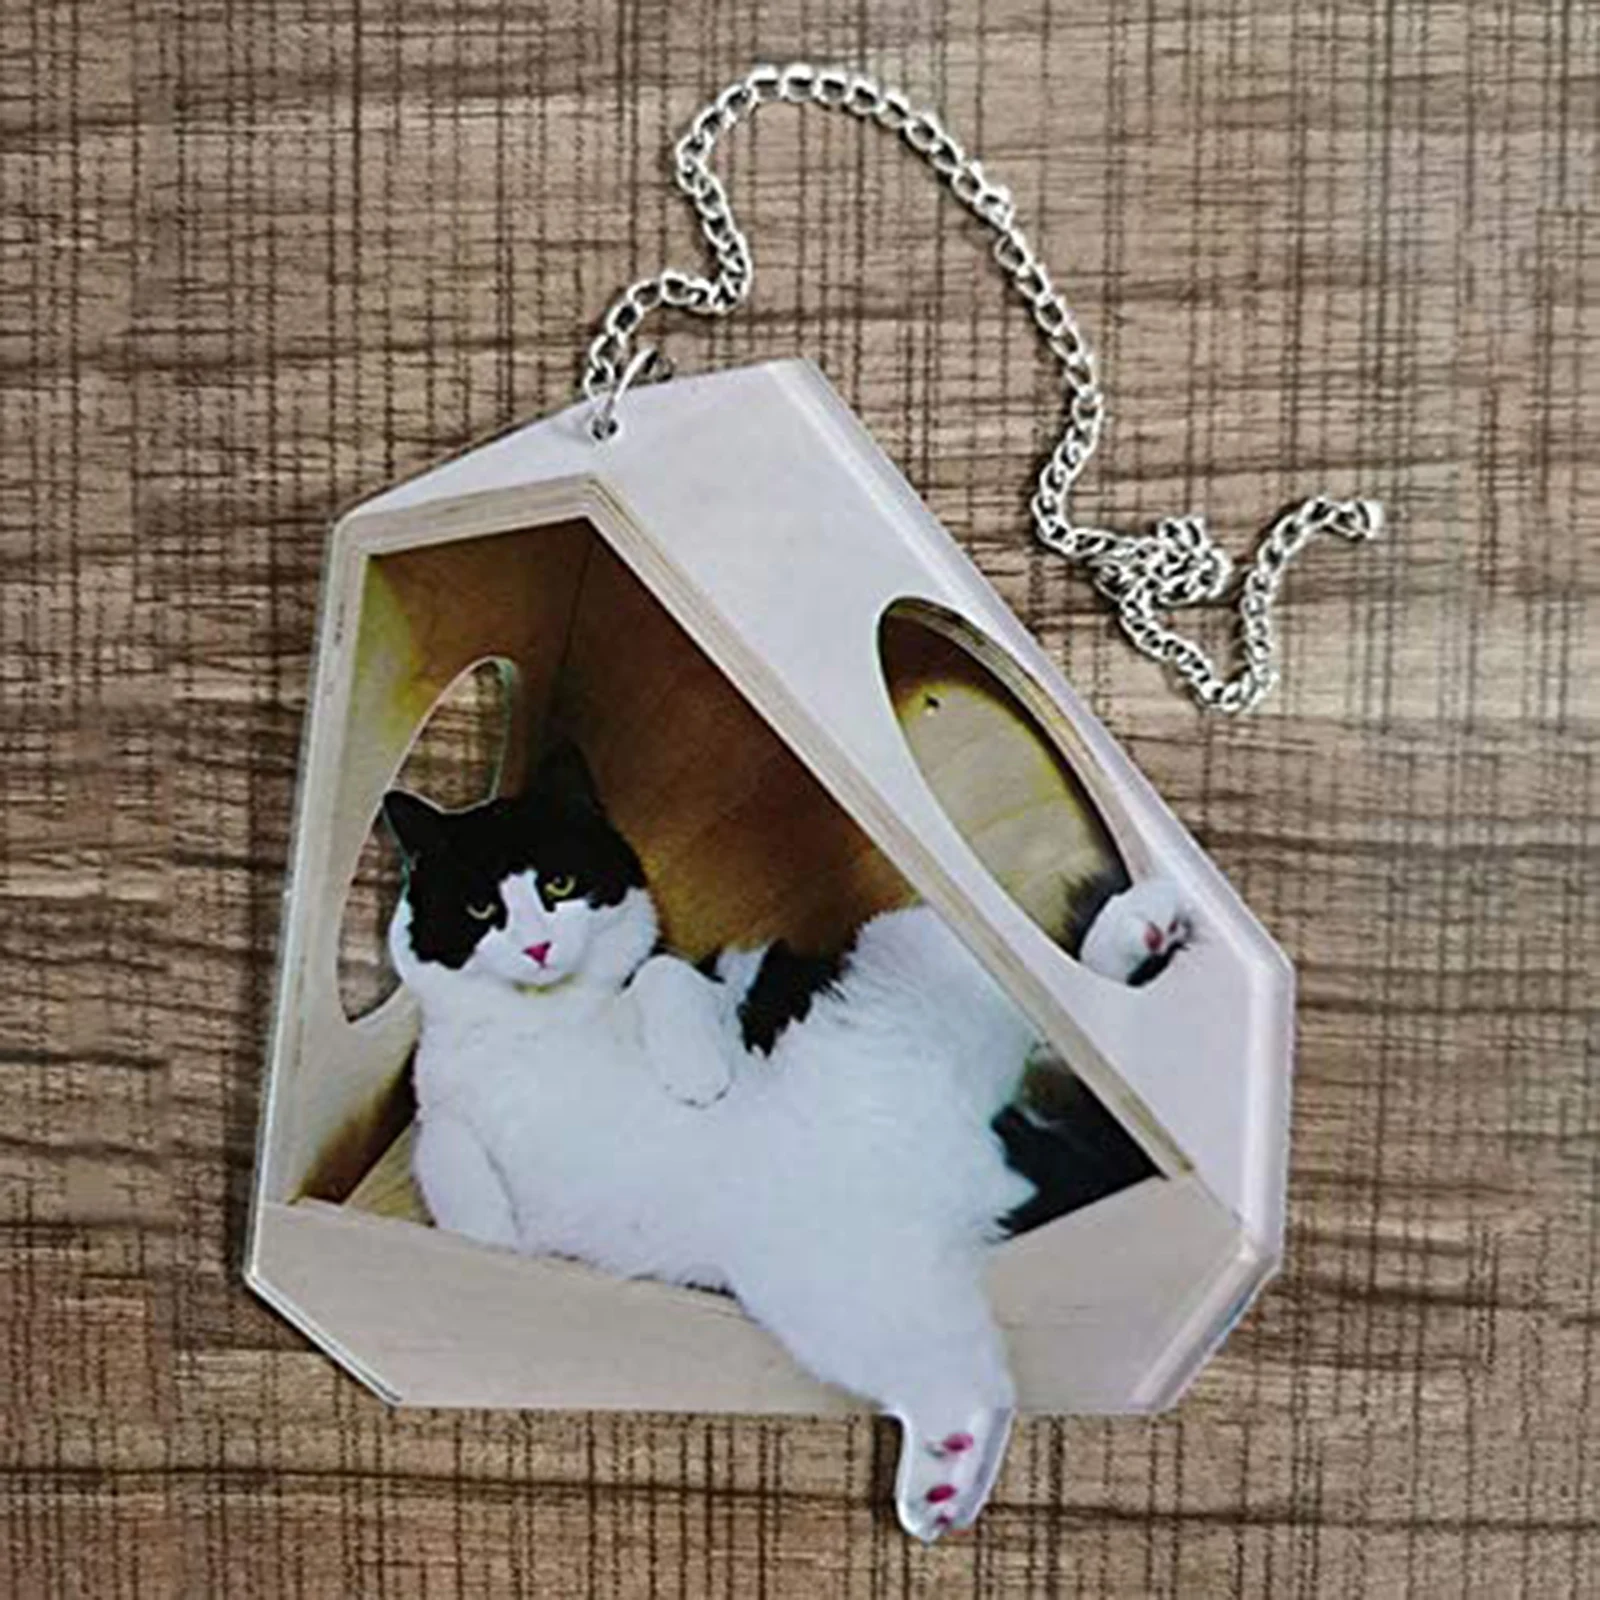 Car Pendant Home & Office Decor Charm Pendant Ornaments Charms Rearview  Decoration Hanging Home Decor Gift